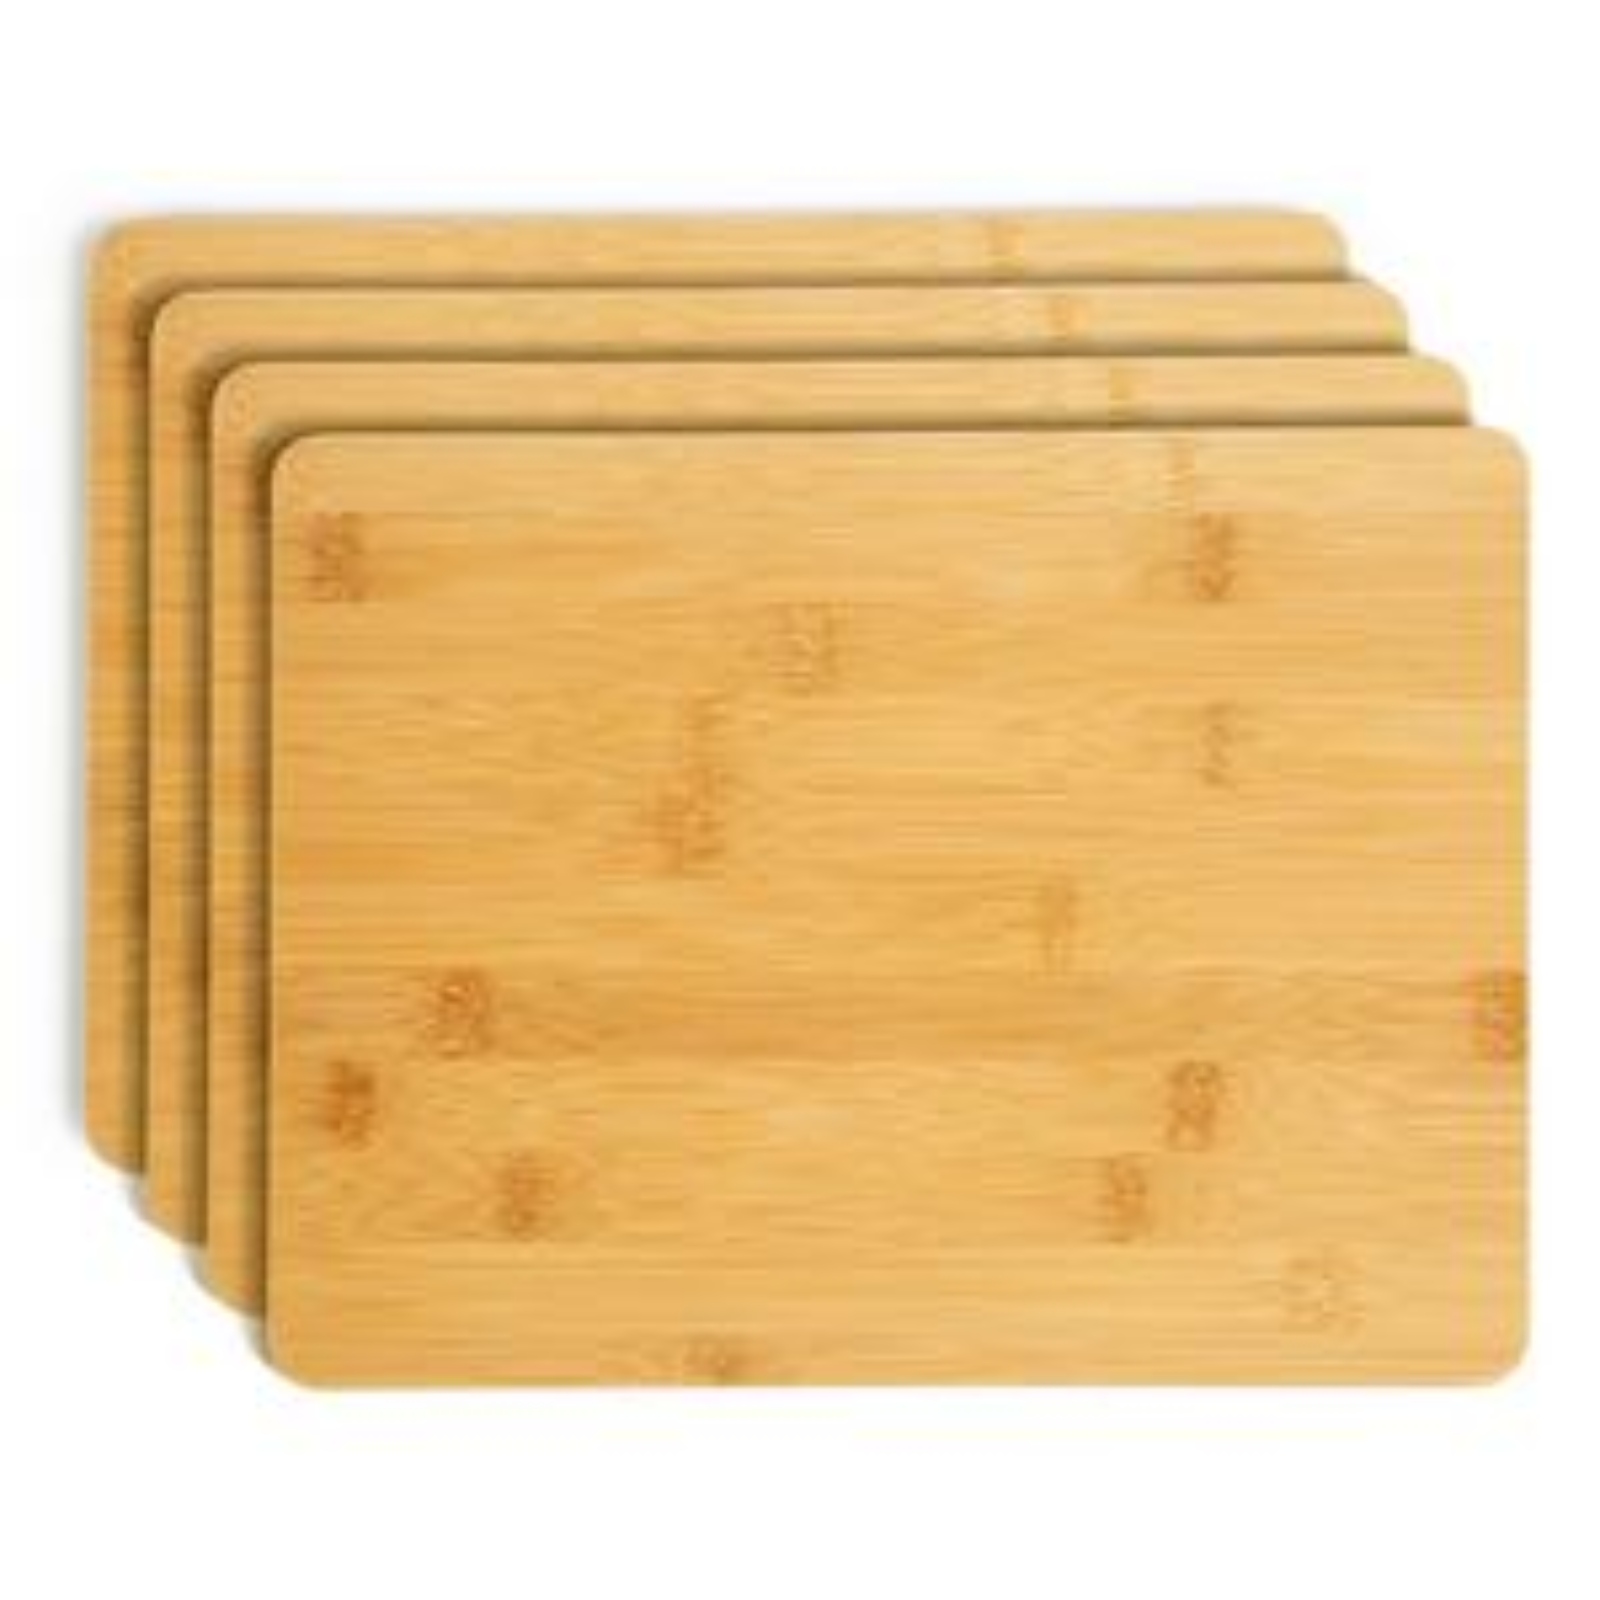 Sainsburys Home Bamboo Placemats 4 Pack